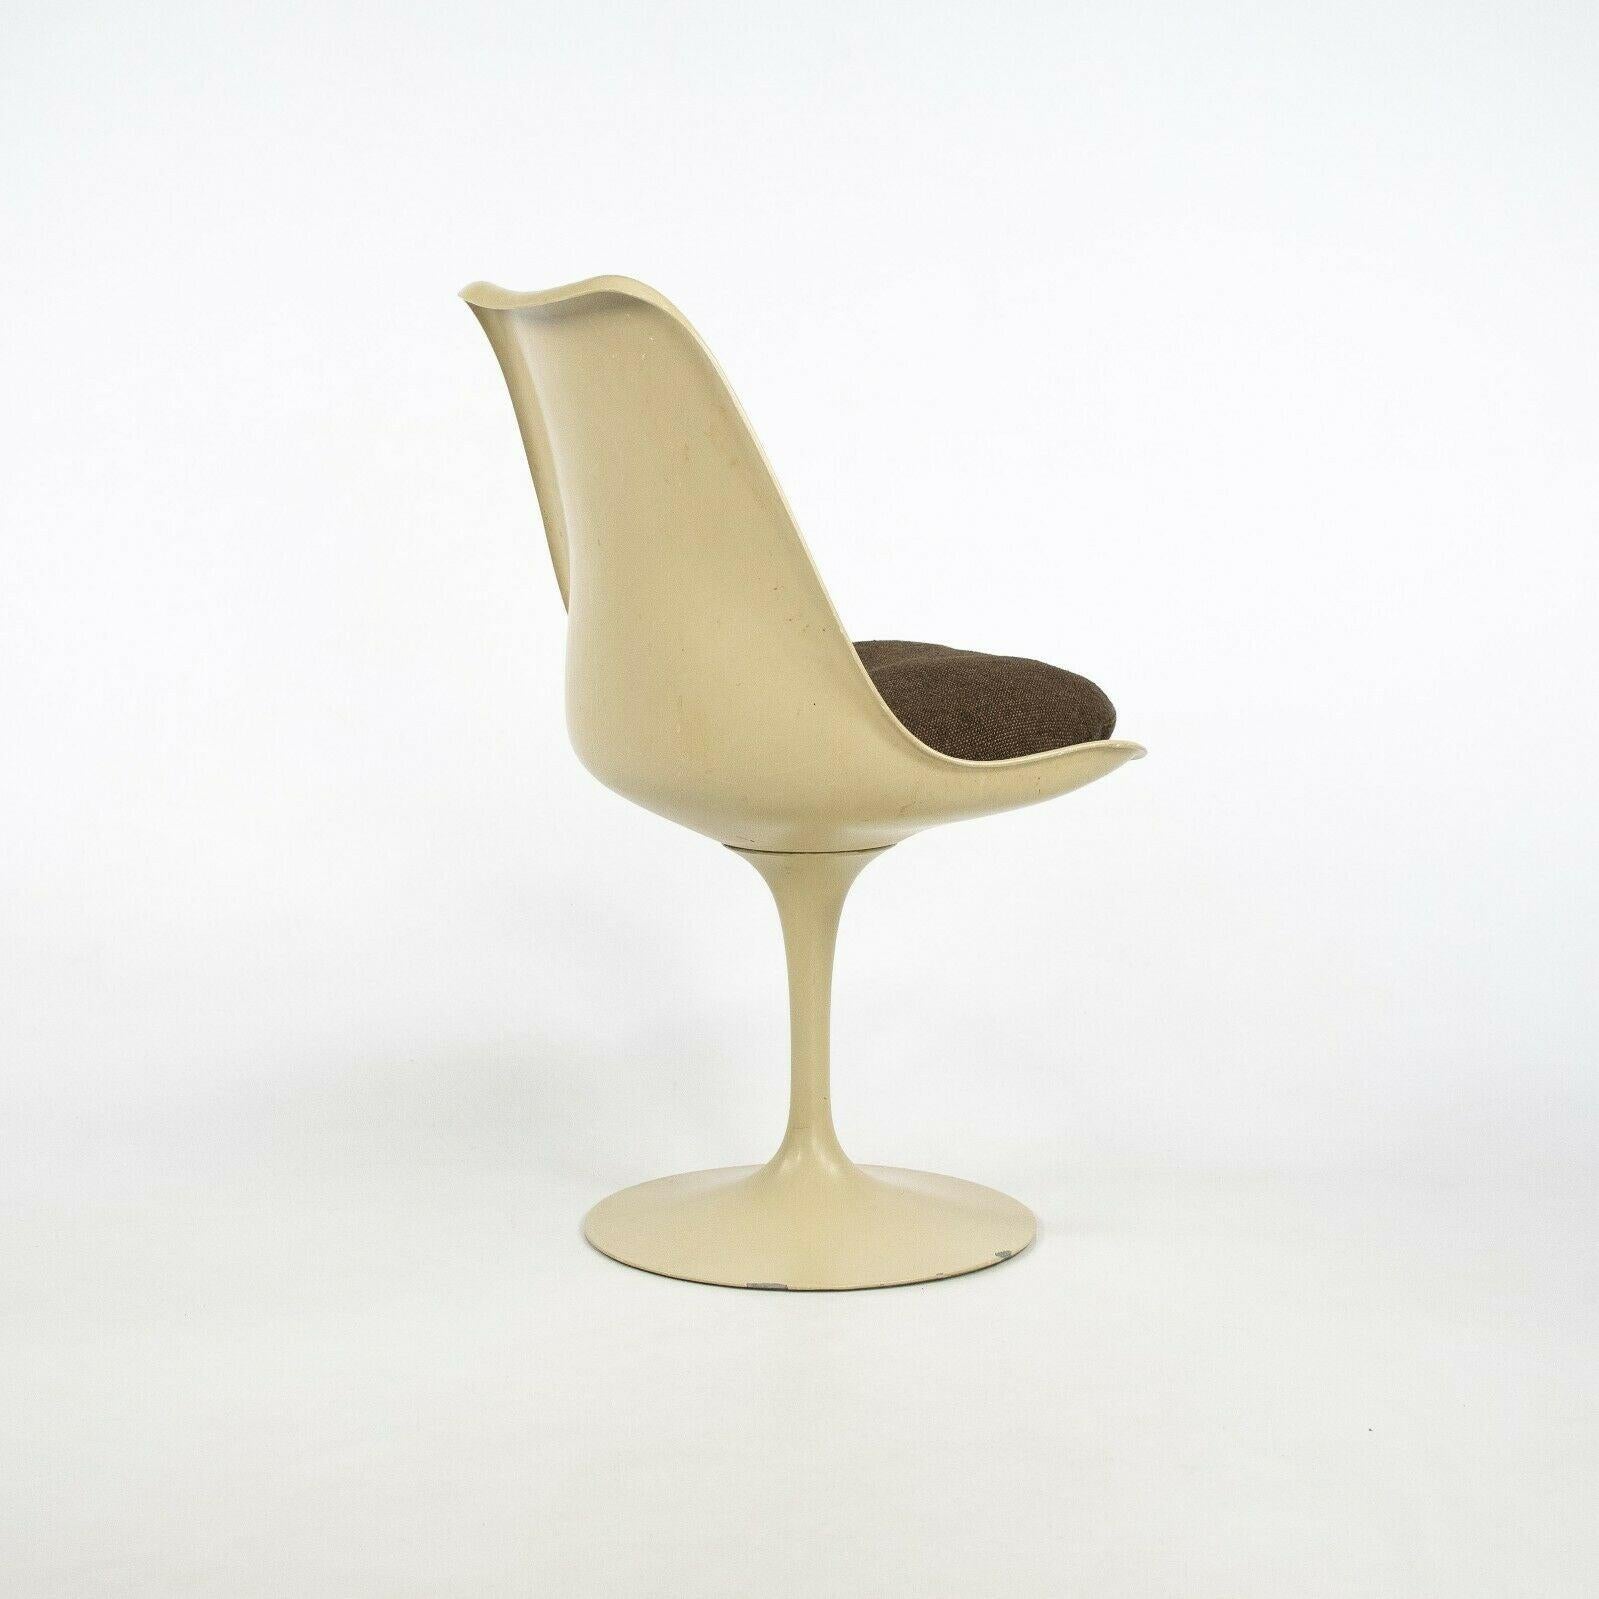 1960s Set of 4 Eero Saarinen for Knoll Armless Tulip Side Chairs in Brown Fabric For Sale 1